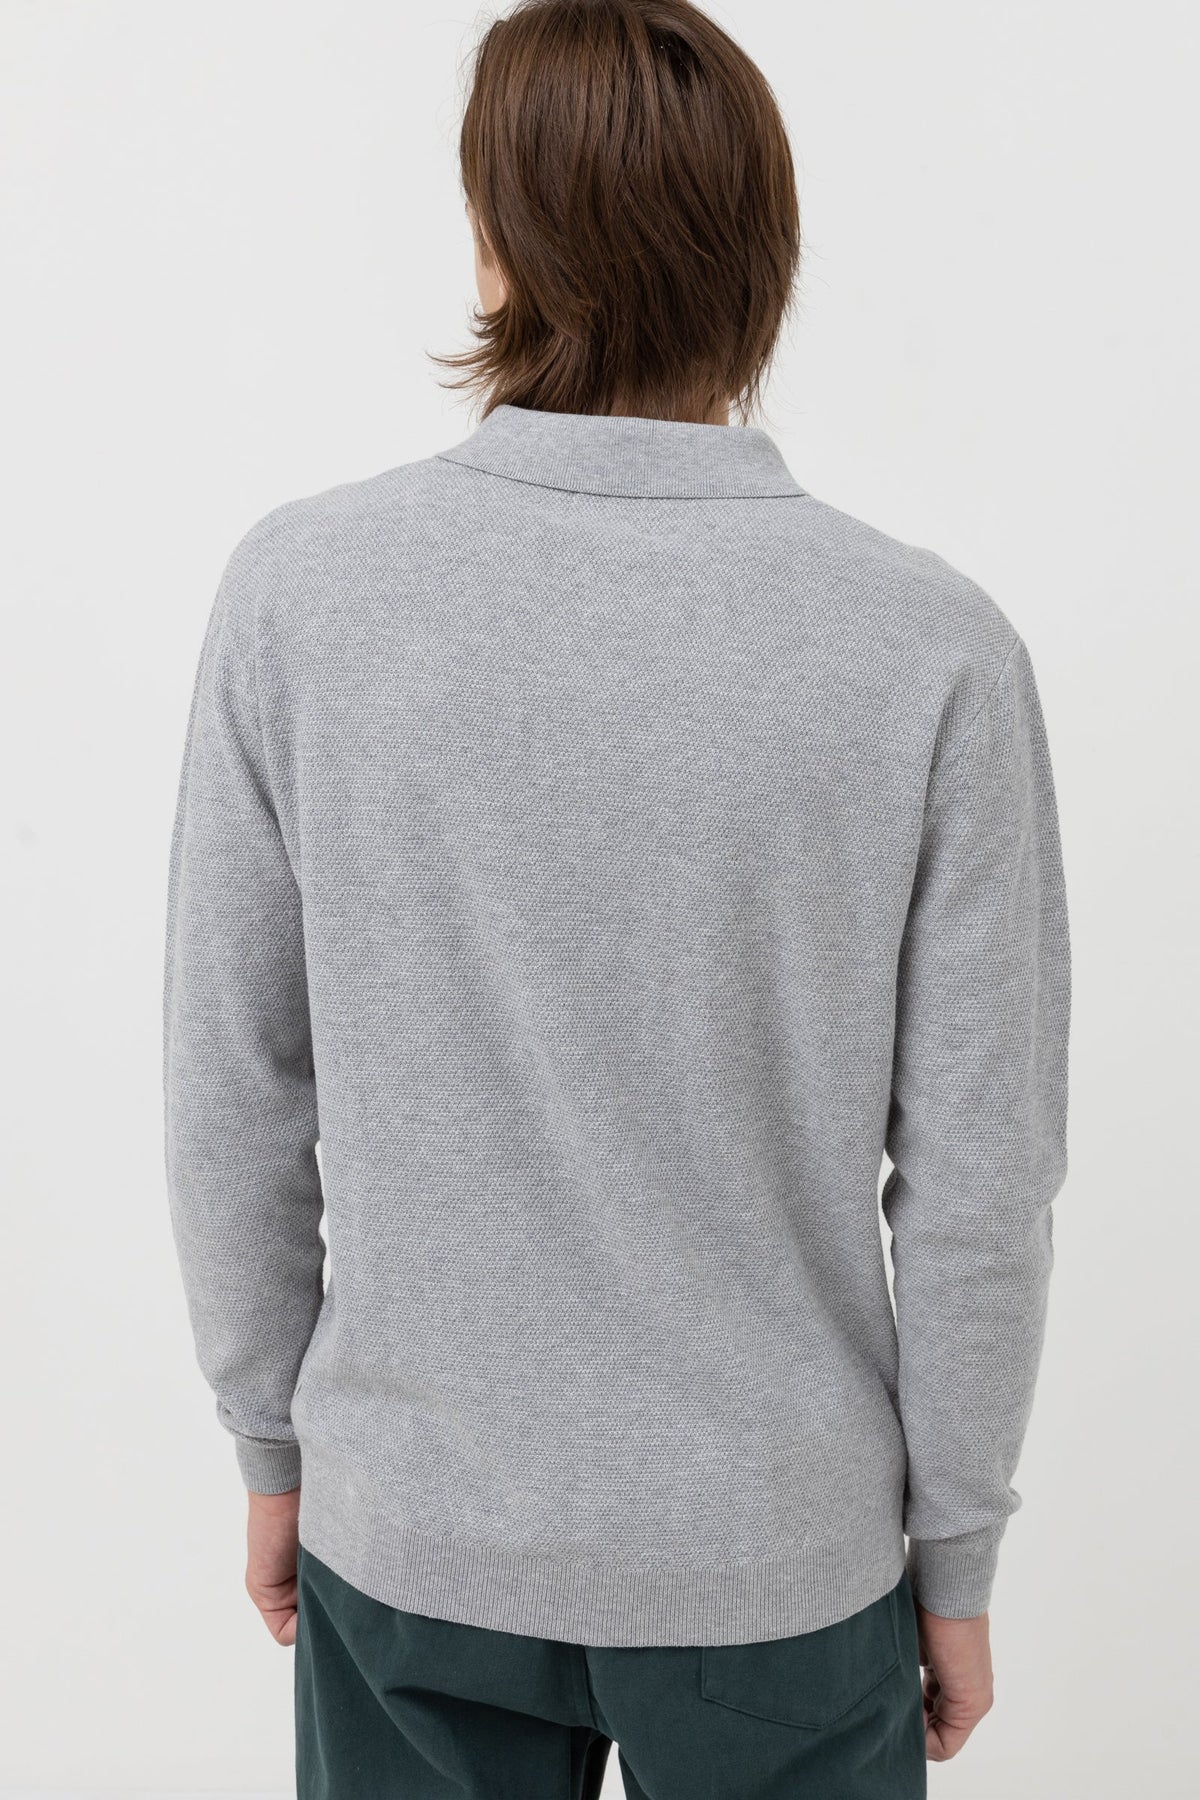 Load image into Gallery viewer, Rhythm Textured Knit Ls Polo - Heather Grey
